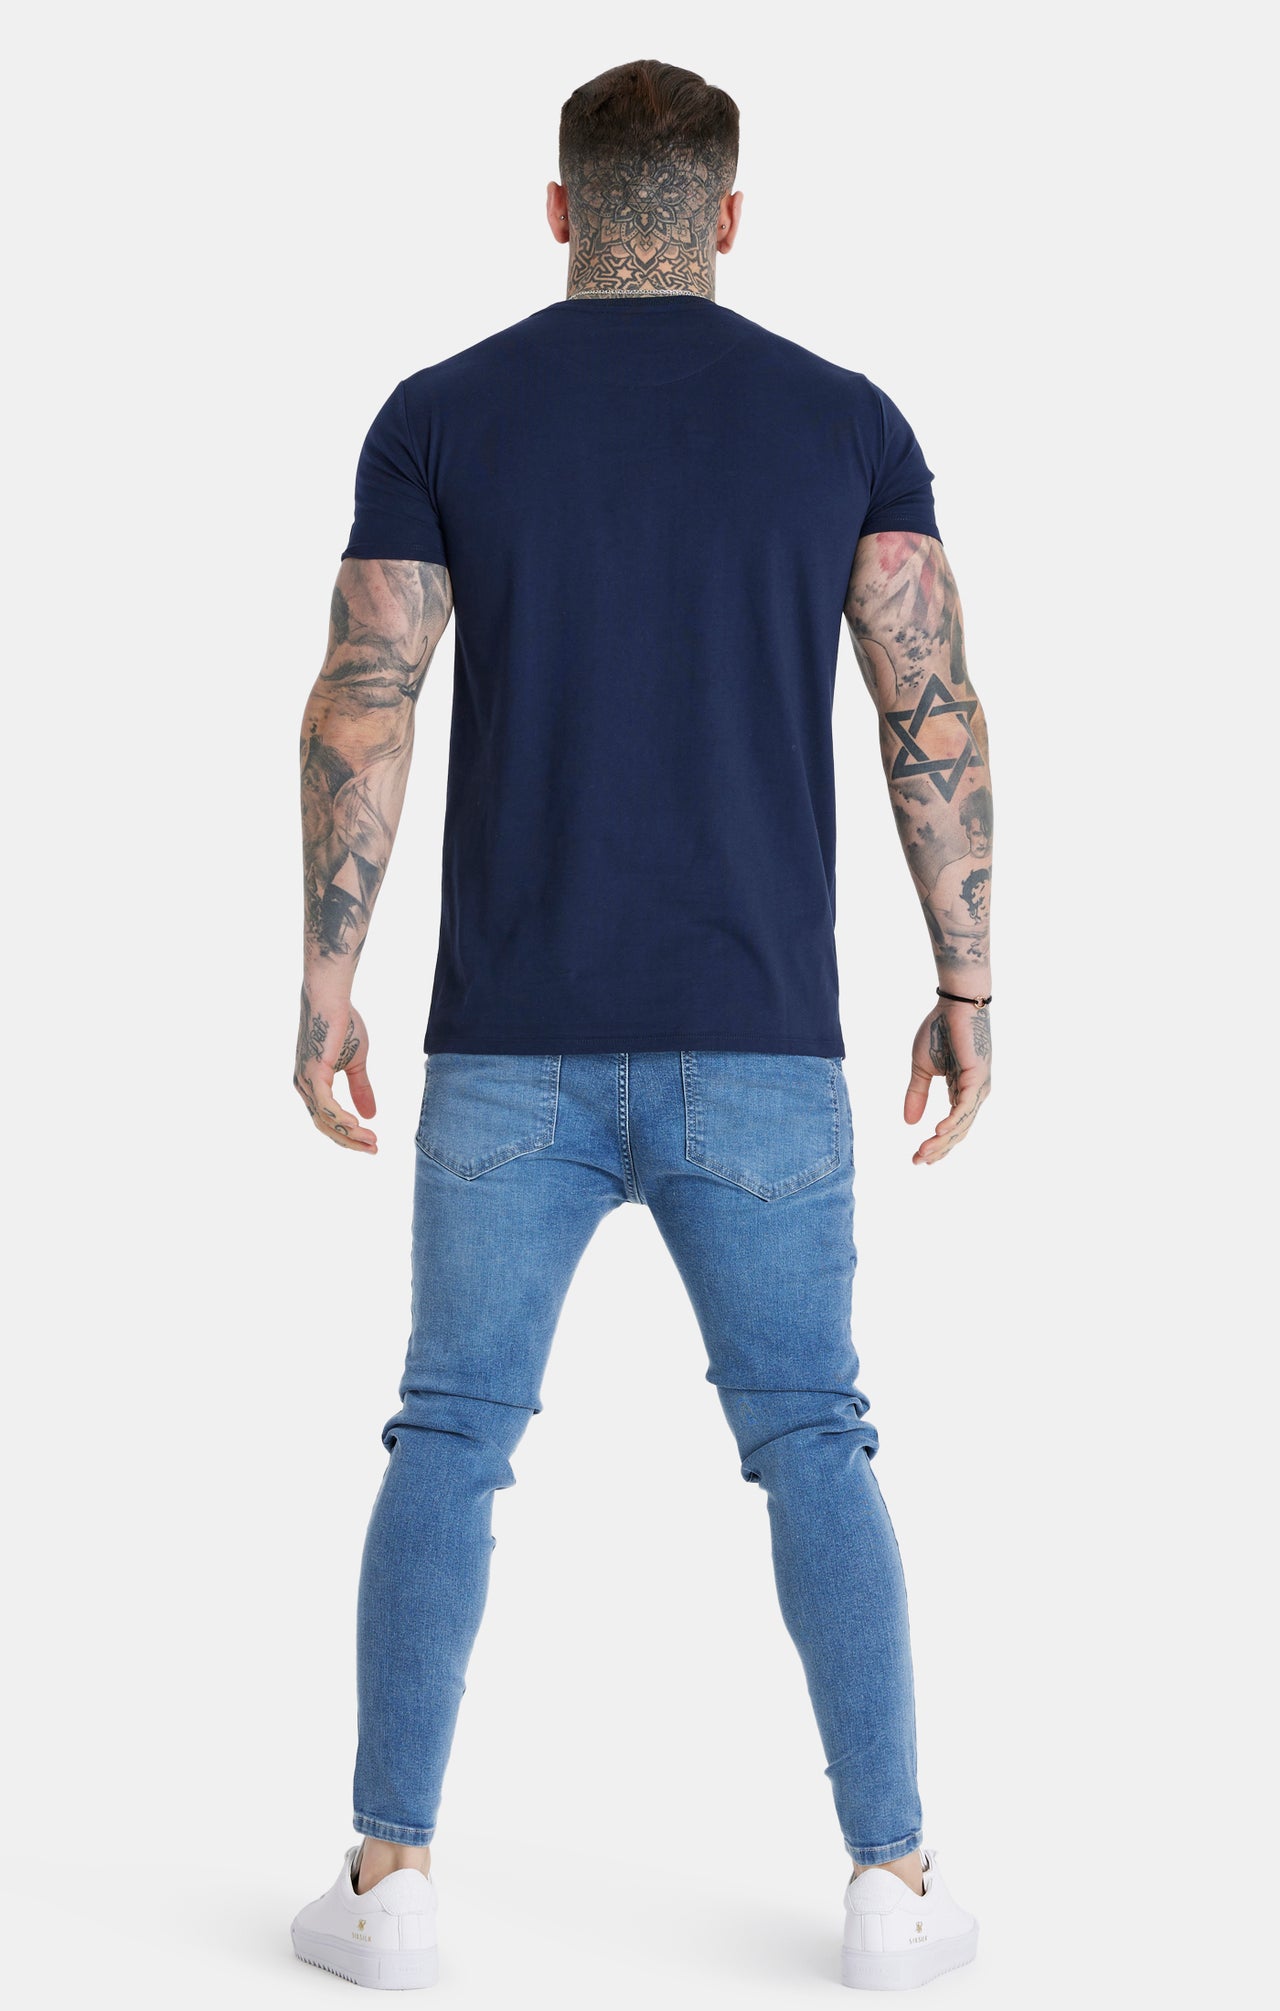 Messi x SikSilk Navy Muscle Fit (4)